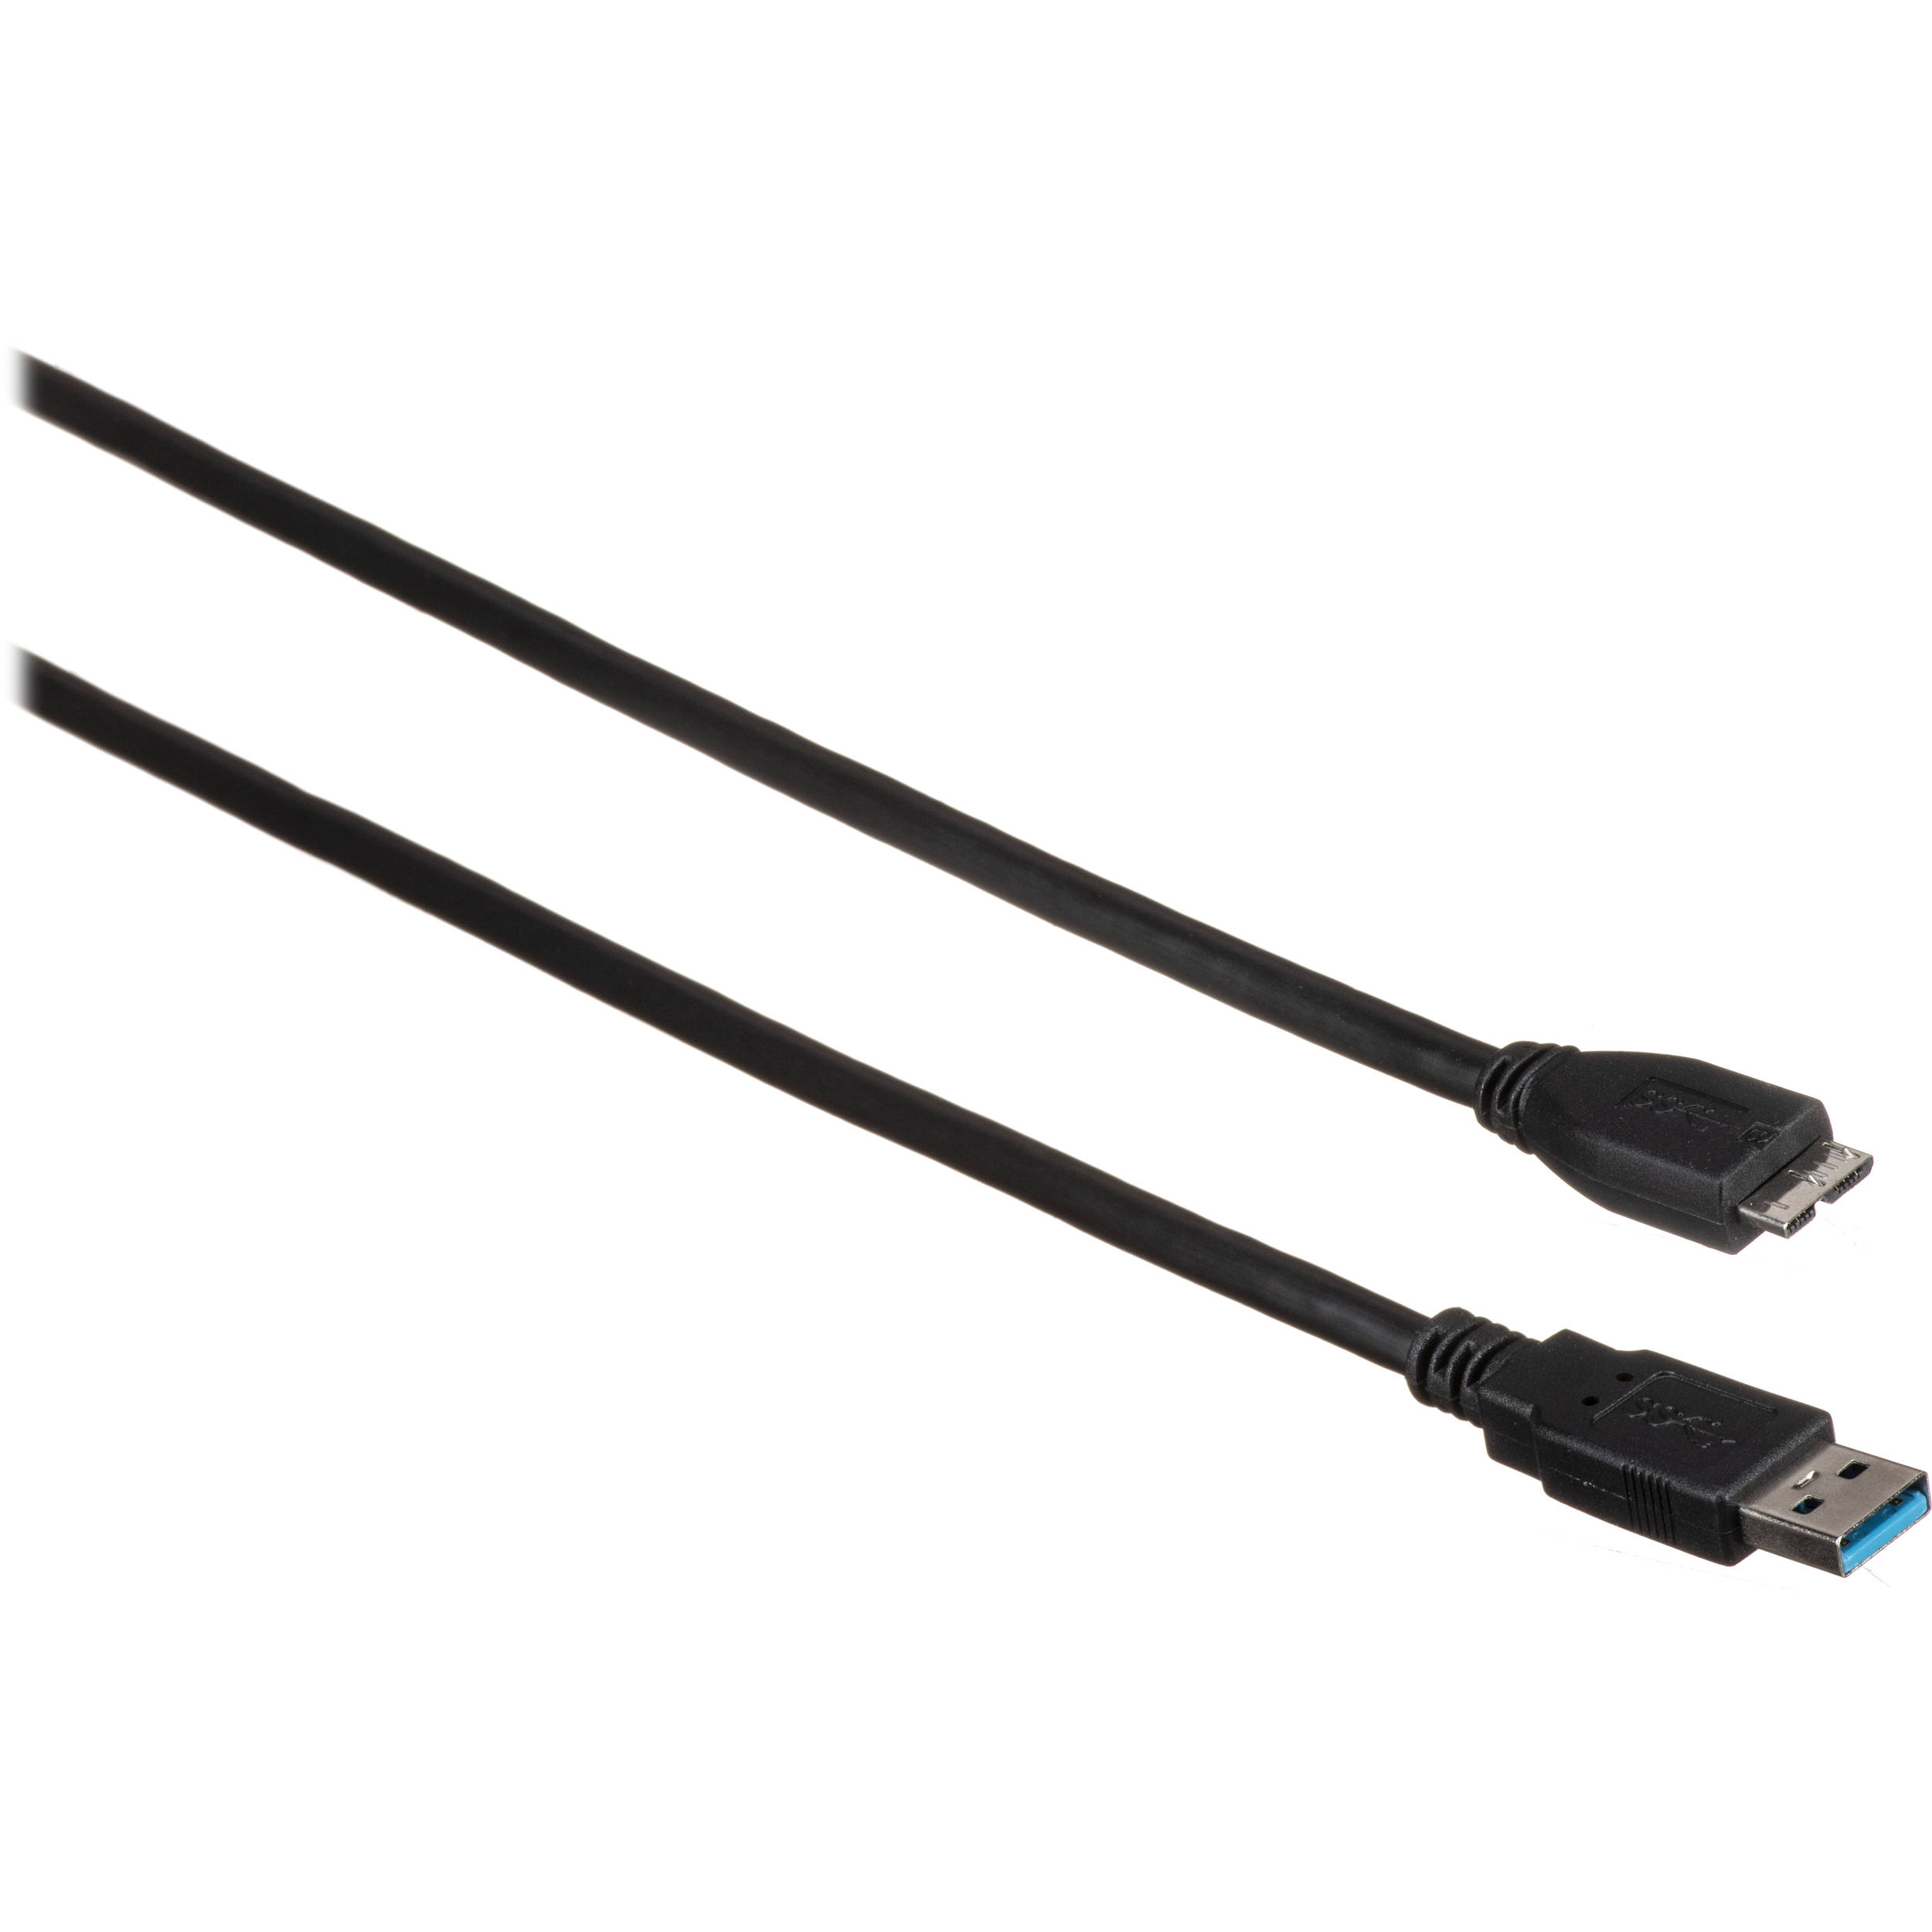 C2G 6.5' (2 m) USB 3.1 Gen 1 A Male to Micro B Male Cable (Black)